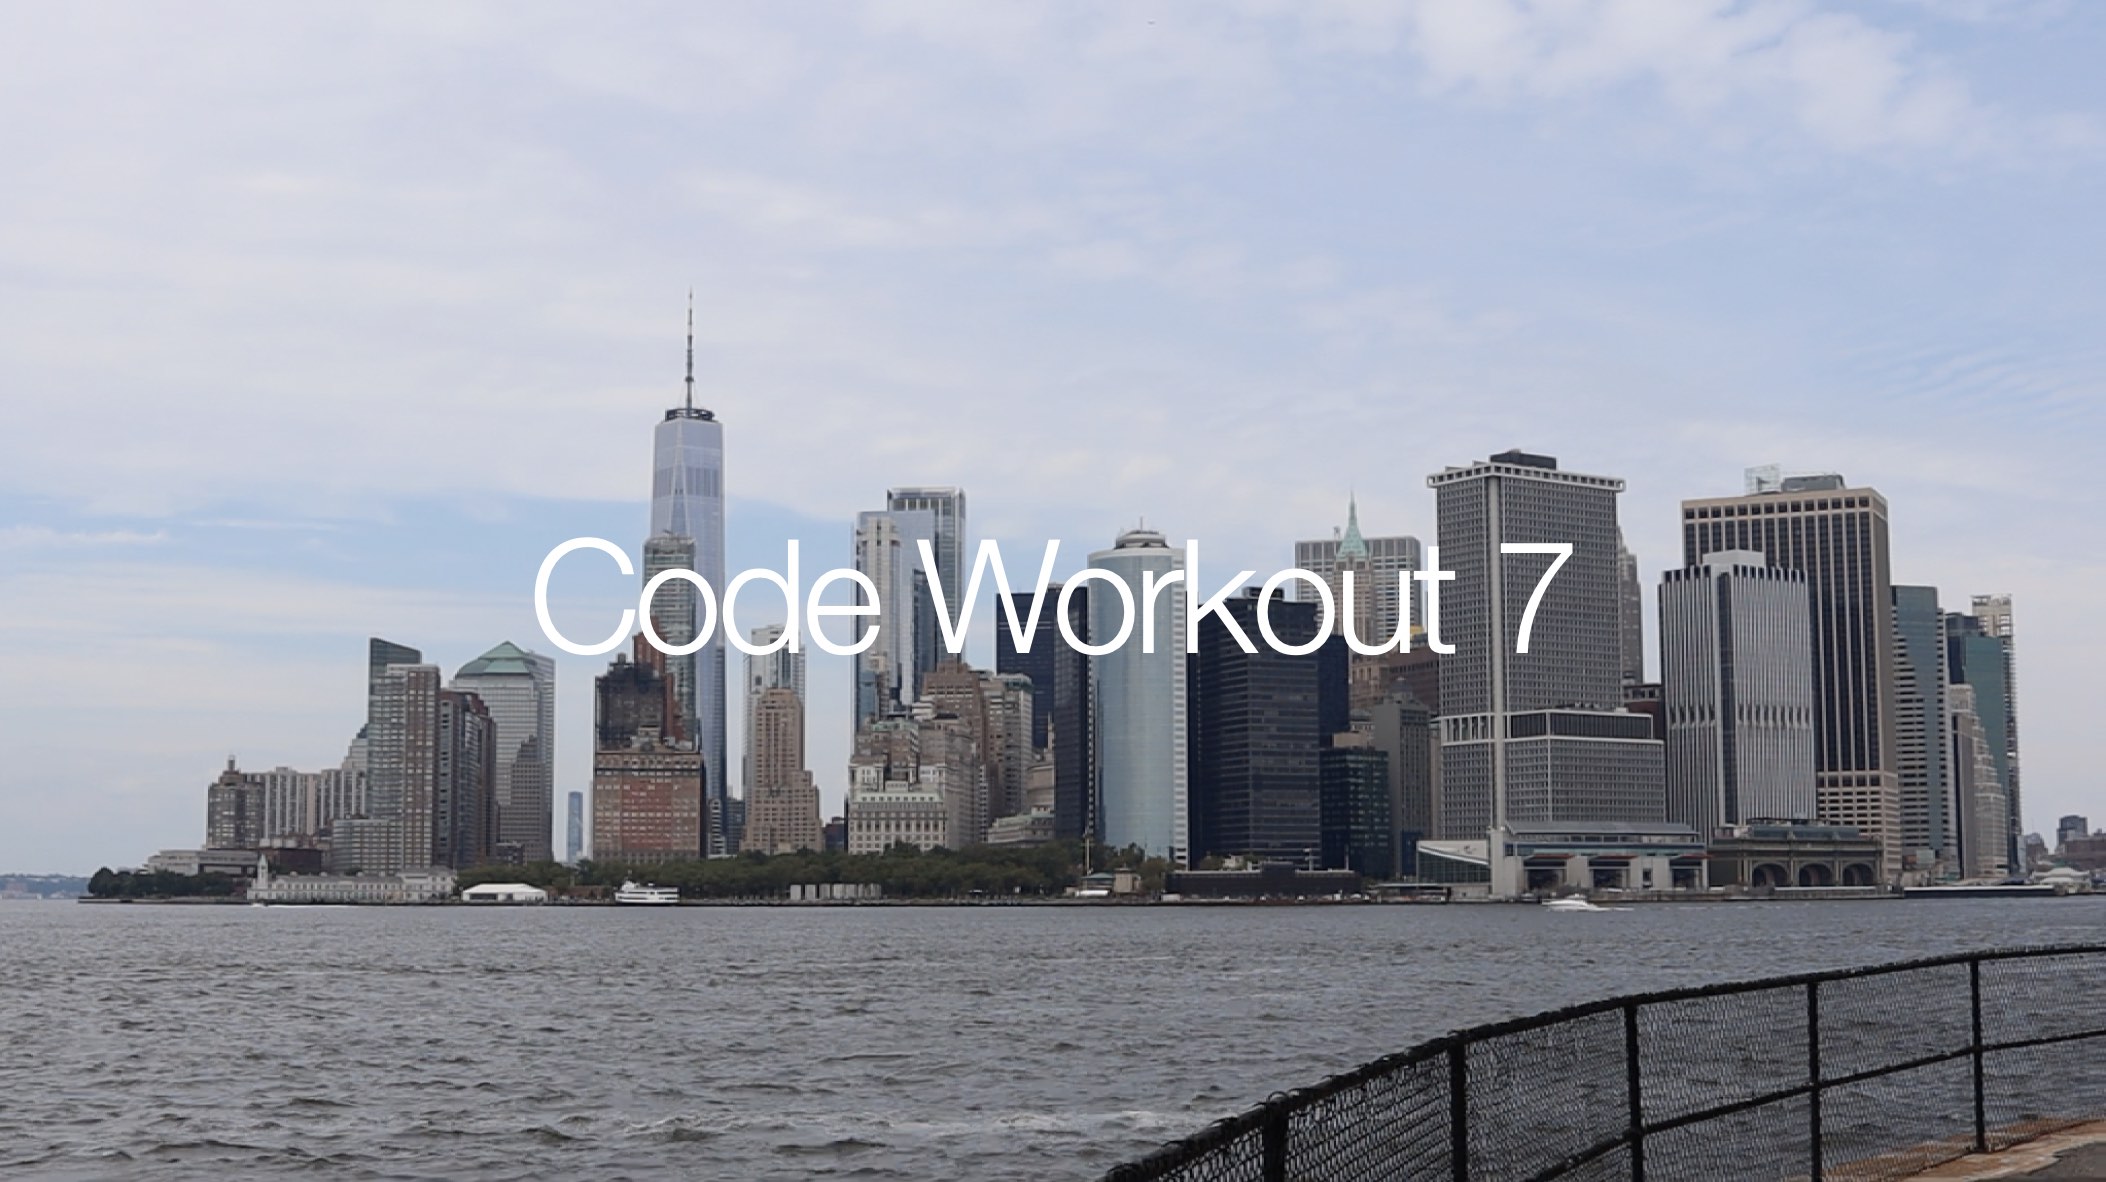 Code Workout 7